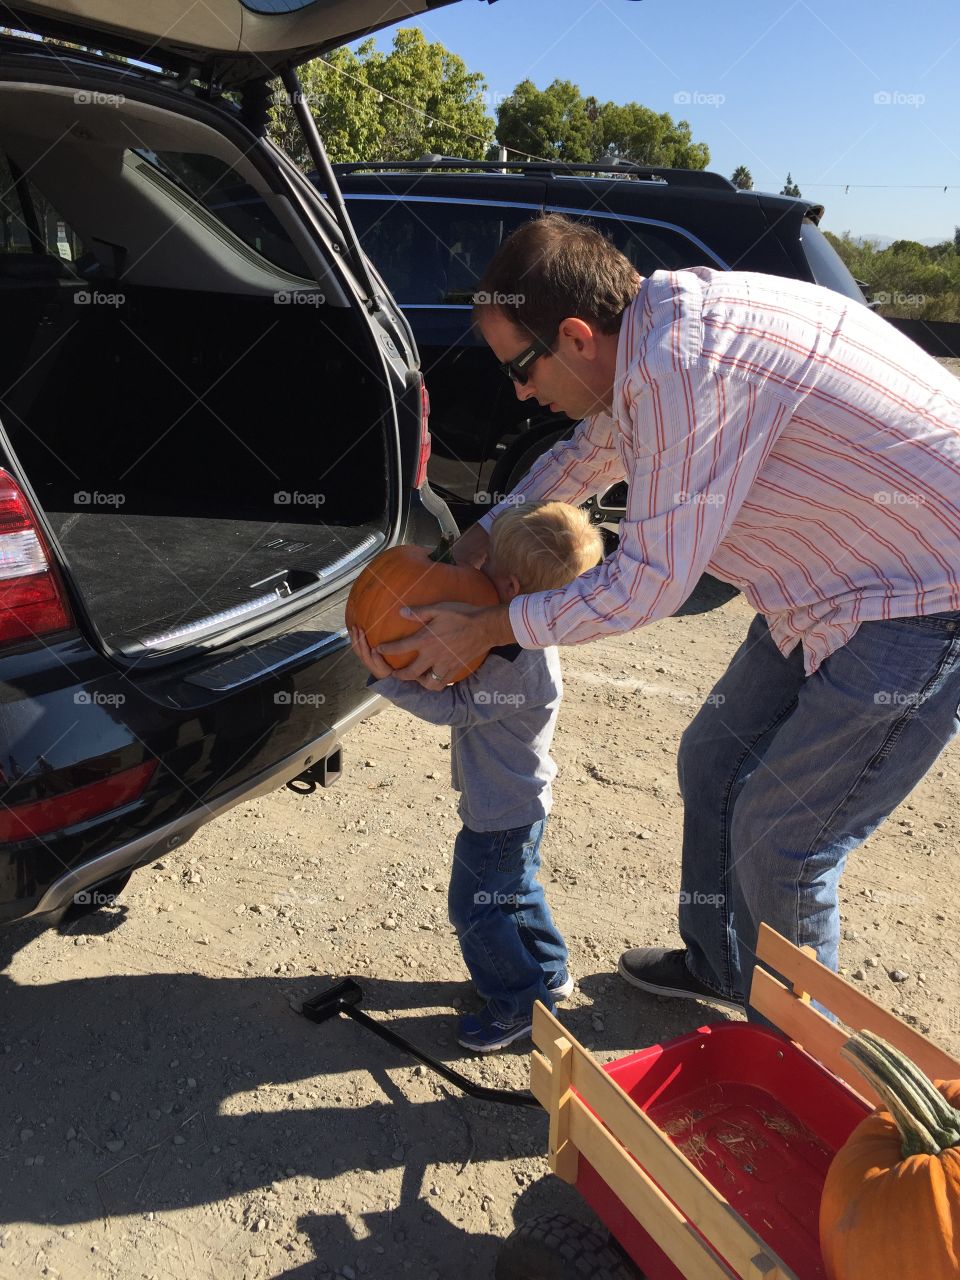 Assisting child with putting pumpkin in trunk of vehicle